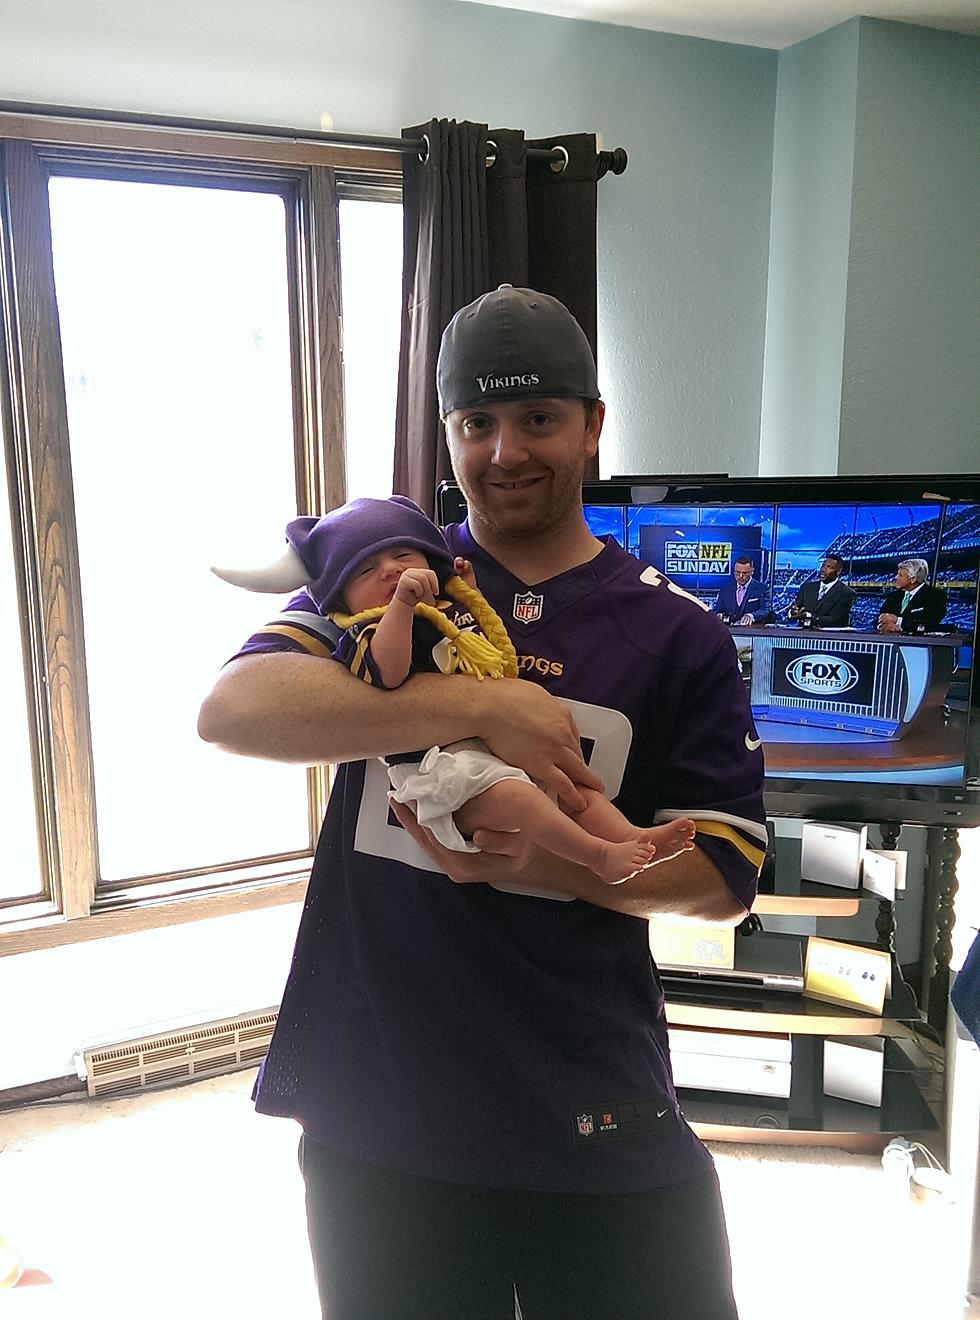 It’s Hard to Cheer For The Vikings-Even When They’re Winning [PICS]